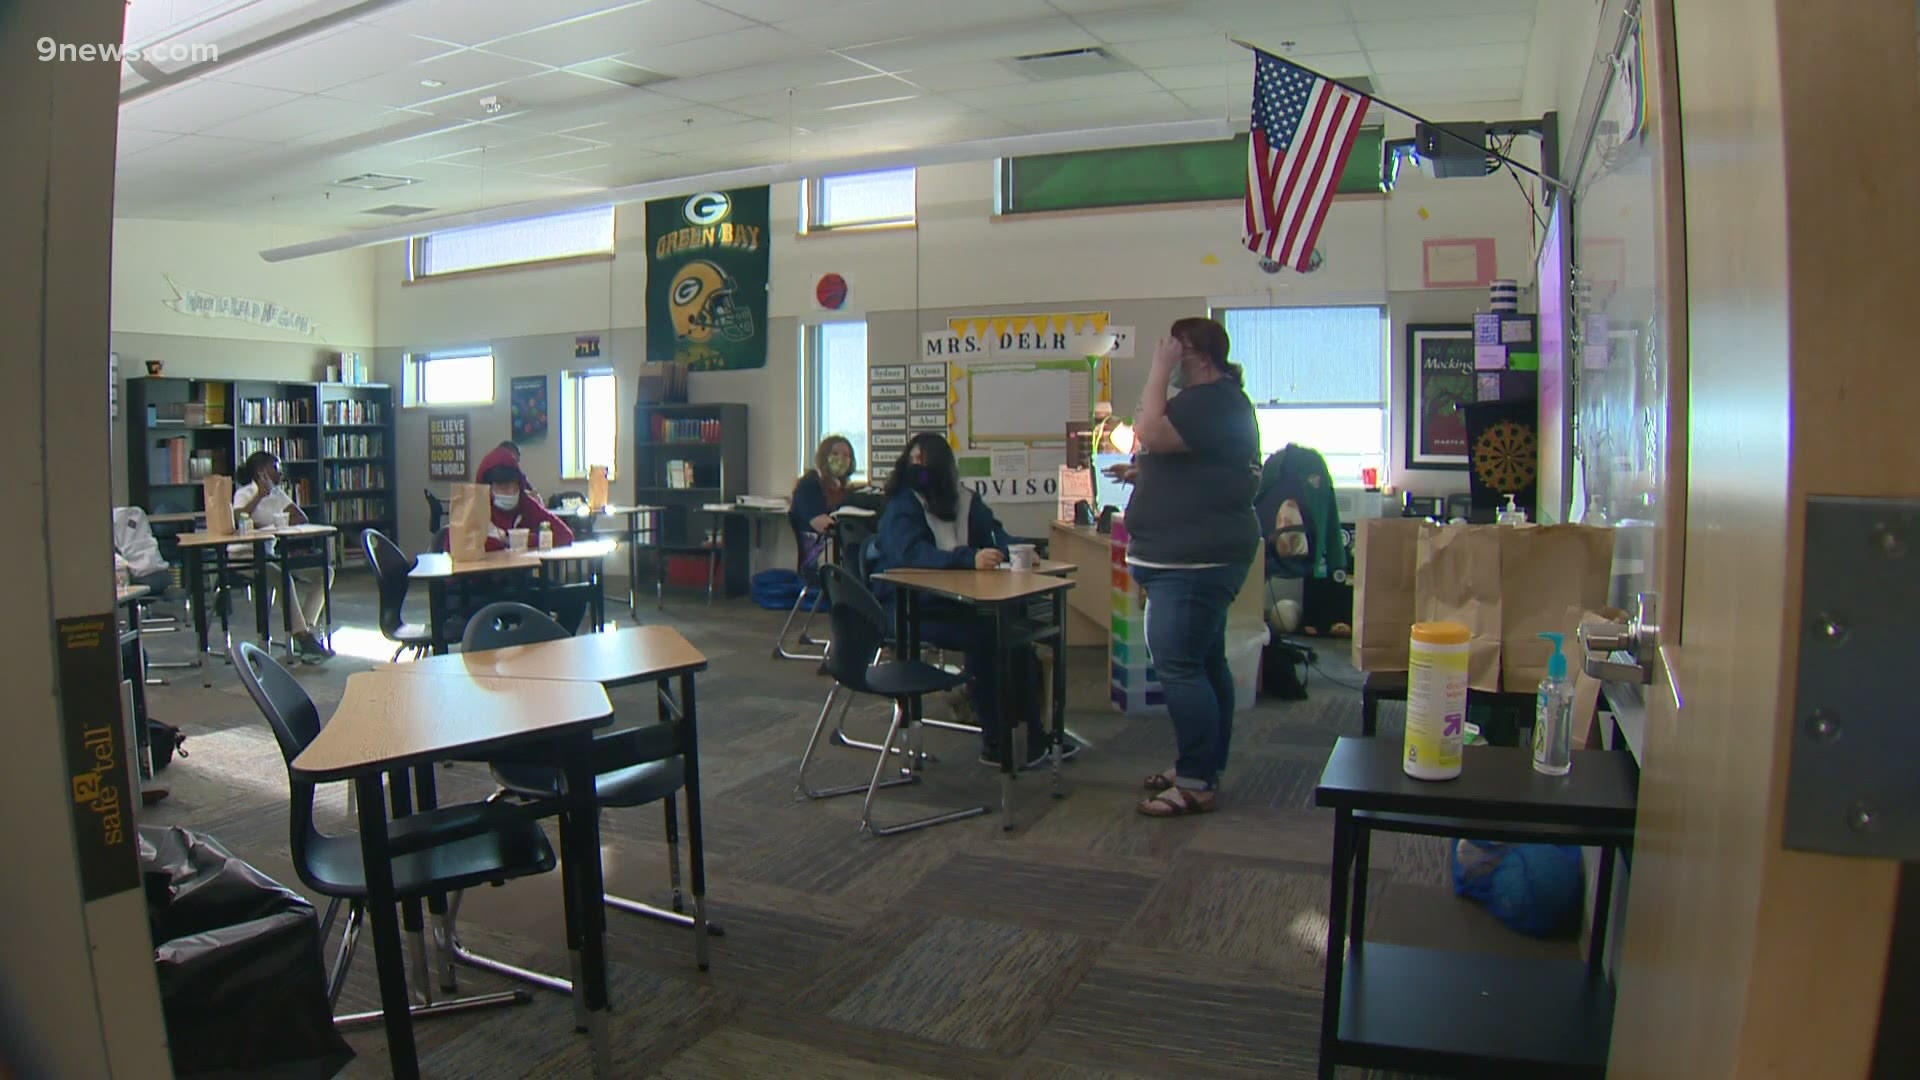 The northeast Denver school has implemented precautions to help students and their parents during the COVID-19 pandemic.